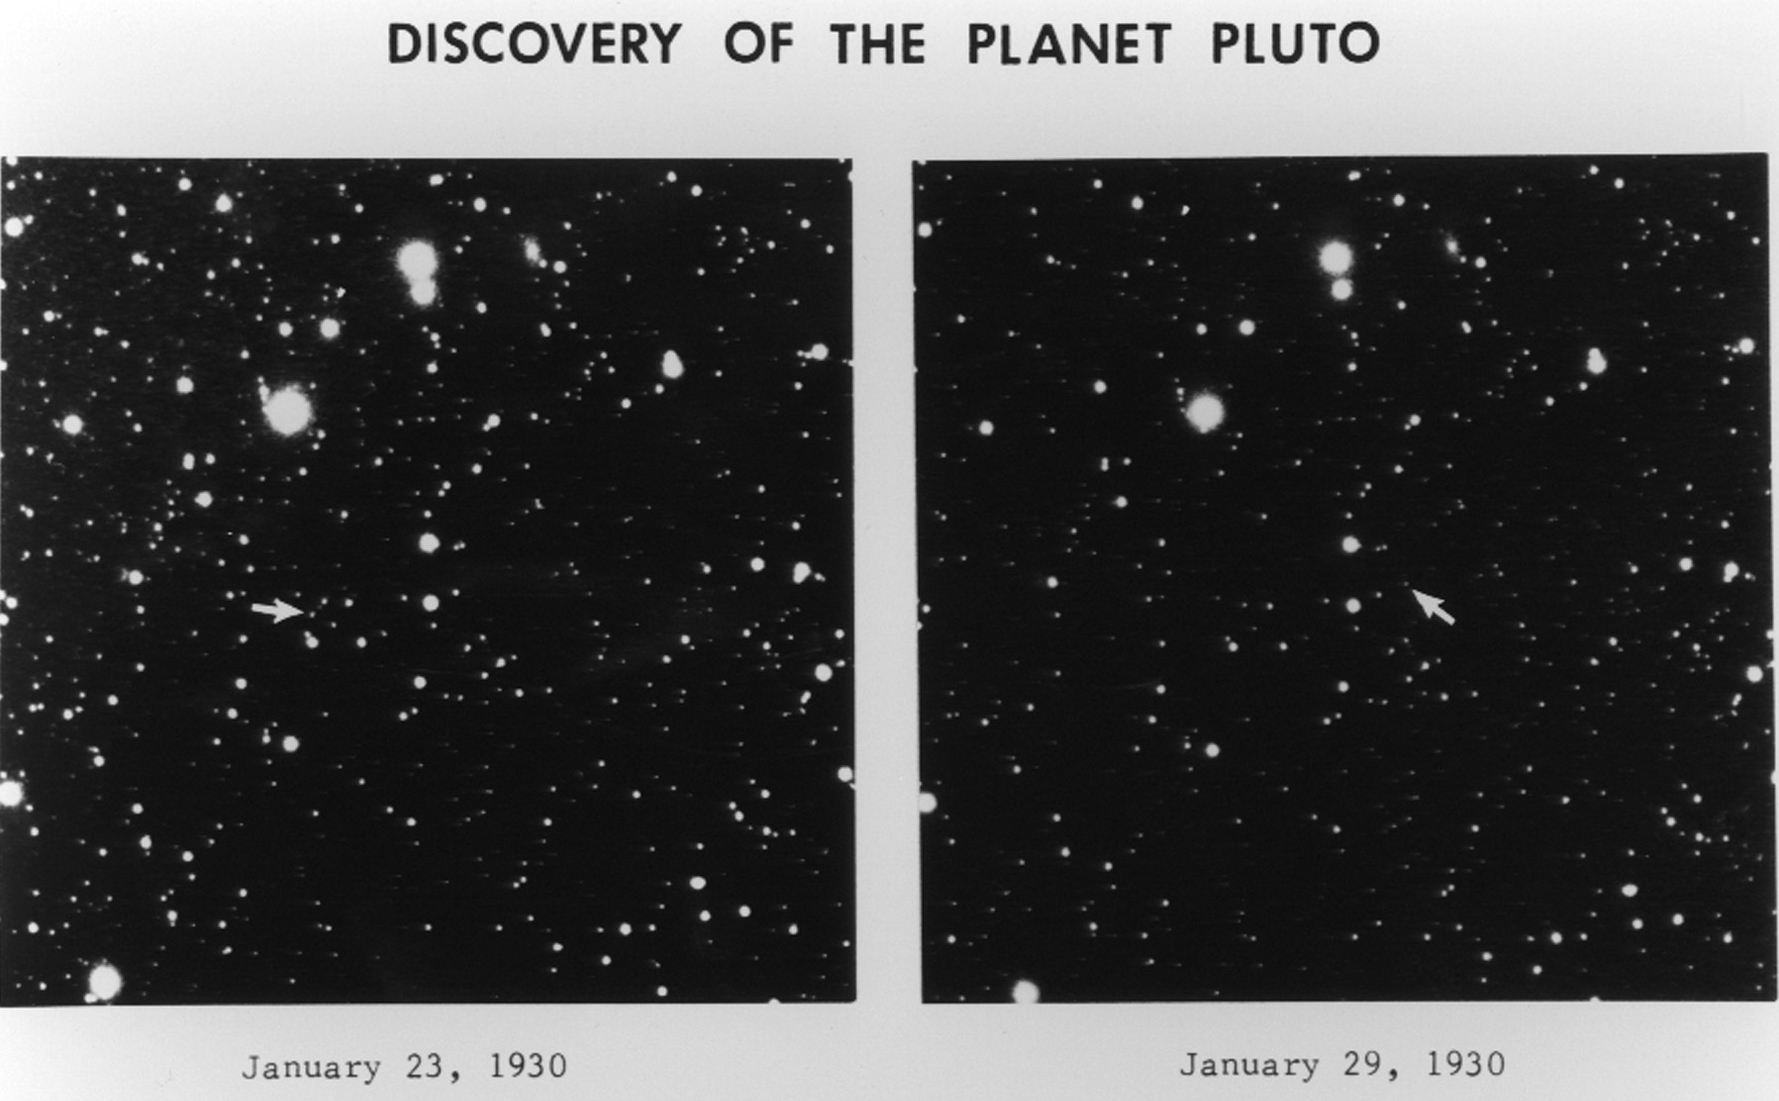 The Pluto Discovery Plates